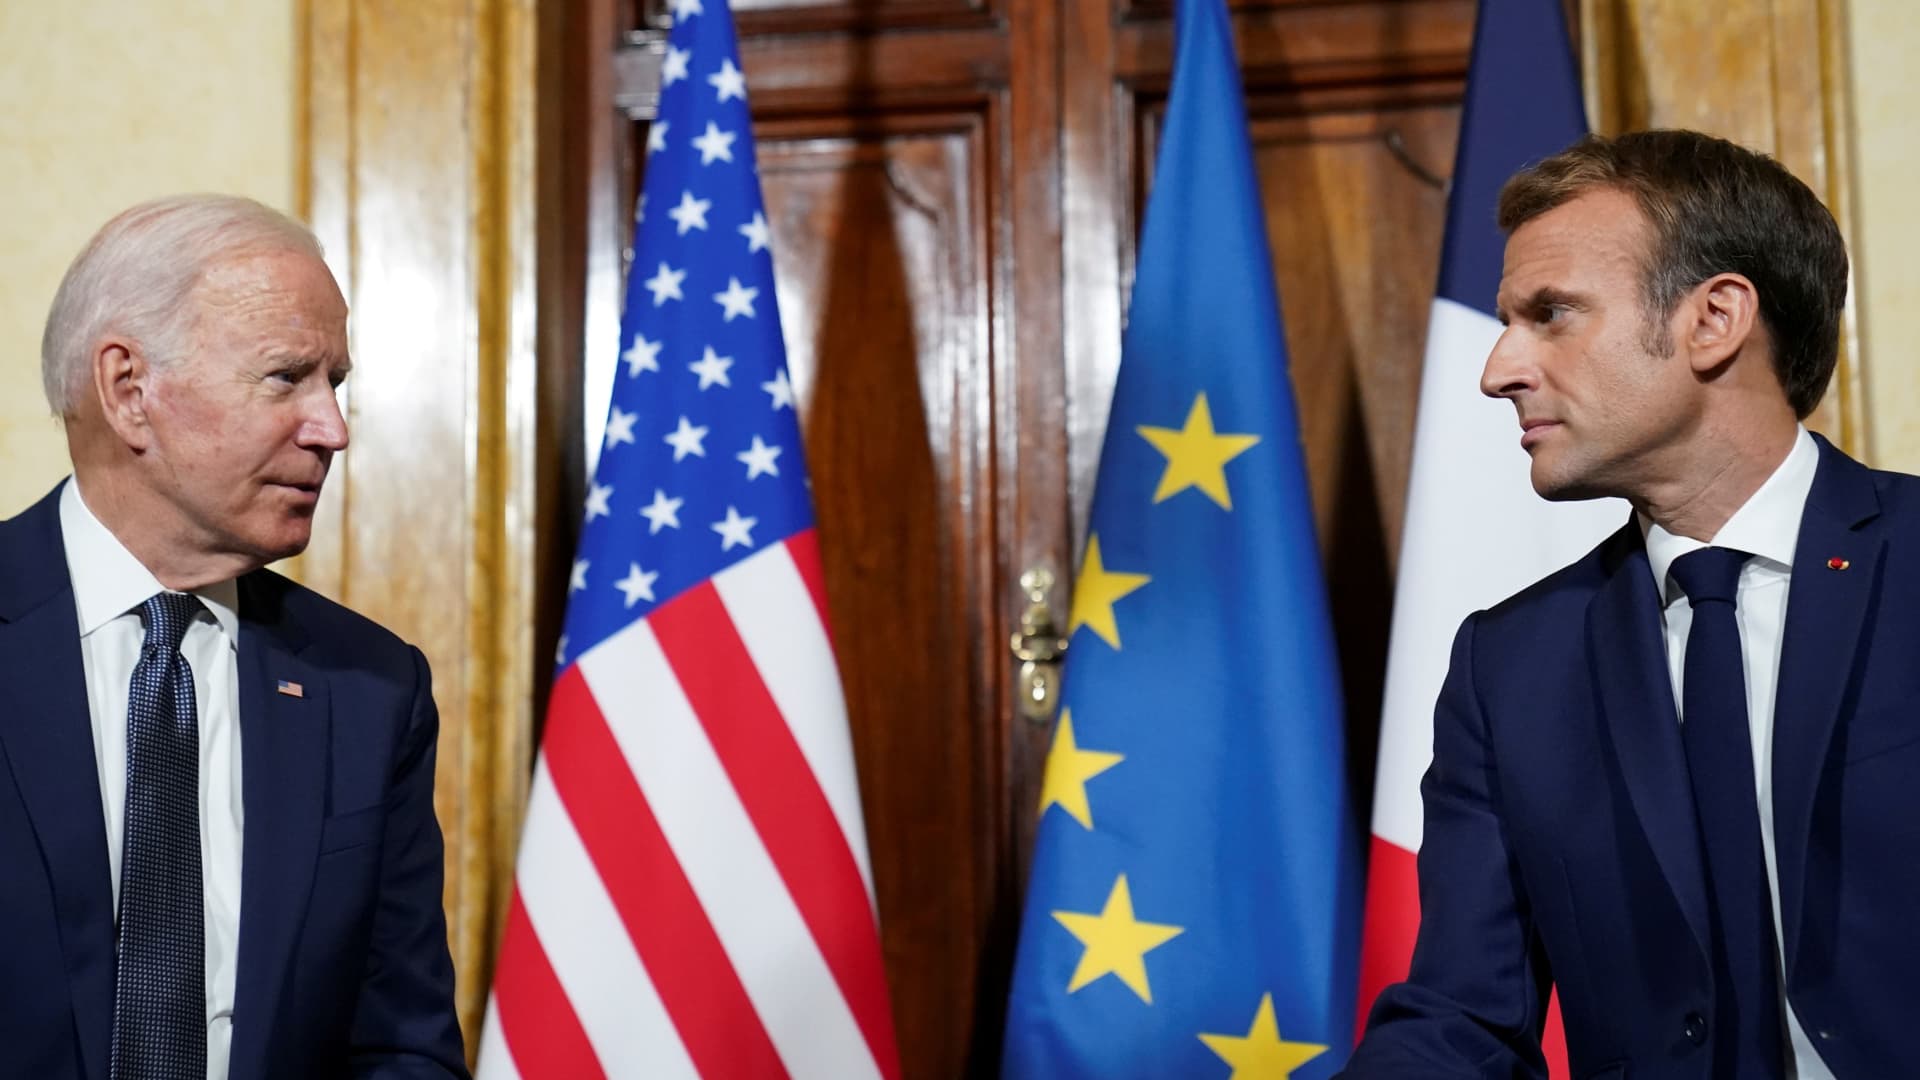 U.S. President Joe Biden meets with French President Emmanuel Macron ahead of the G20 summit in Rome, Italy, October 29, 2021.